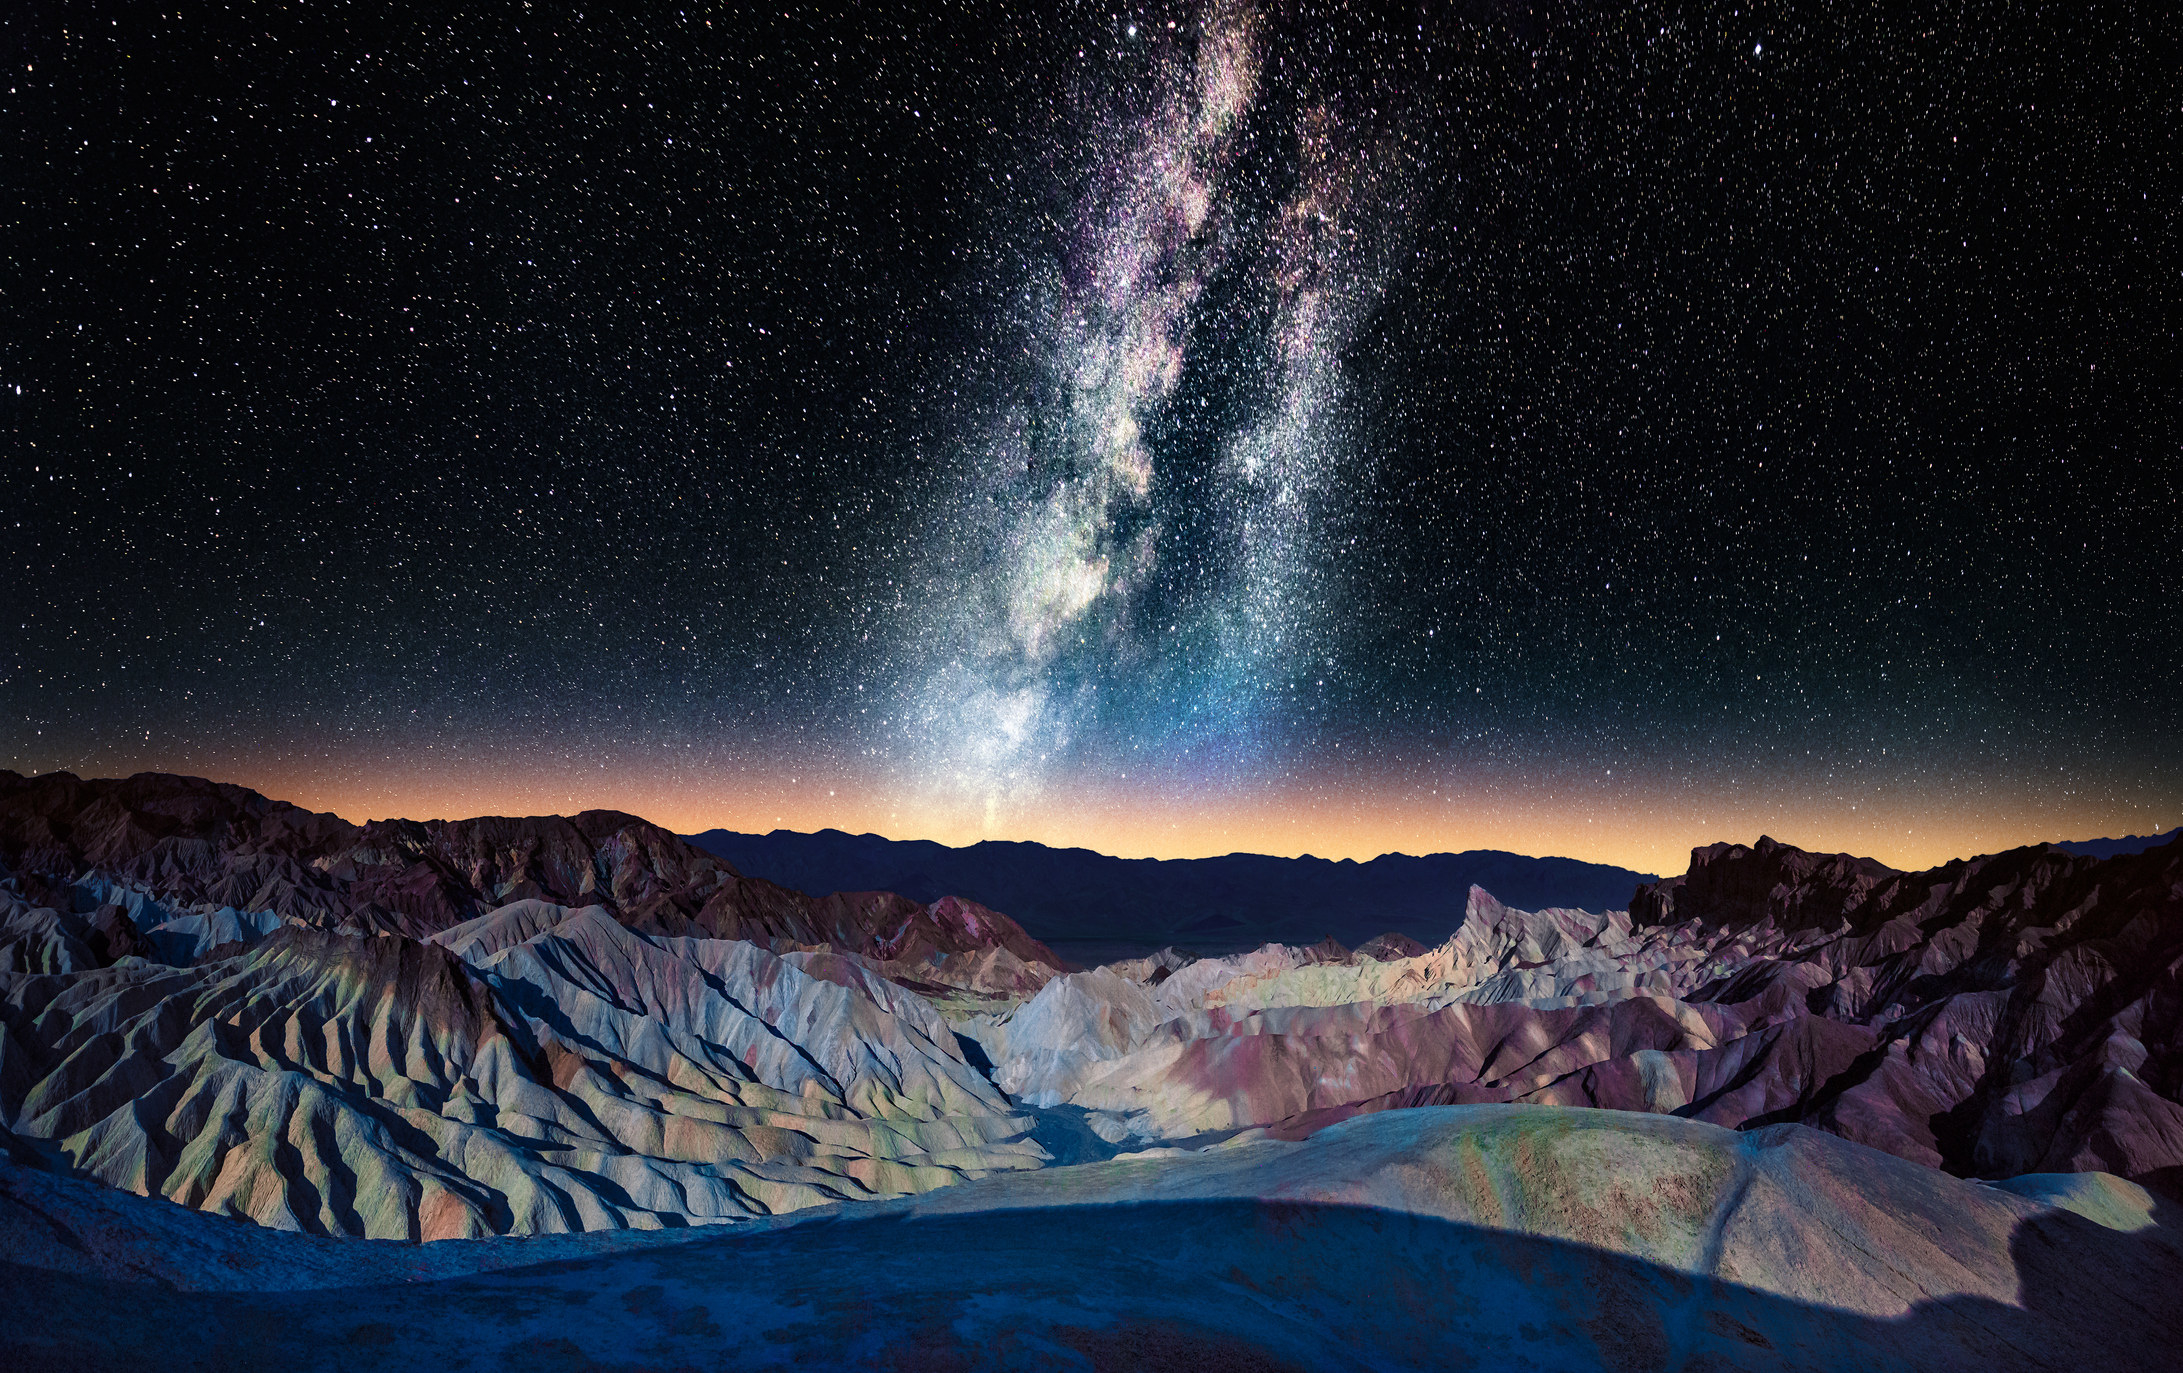 The milky way over Death Valley National Park.